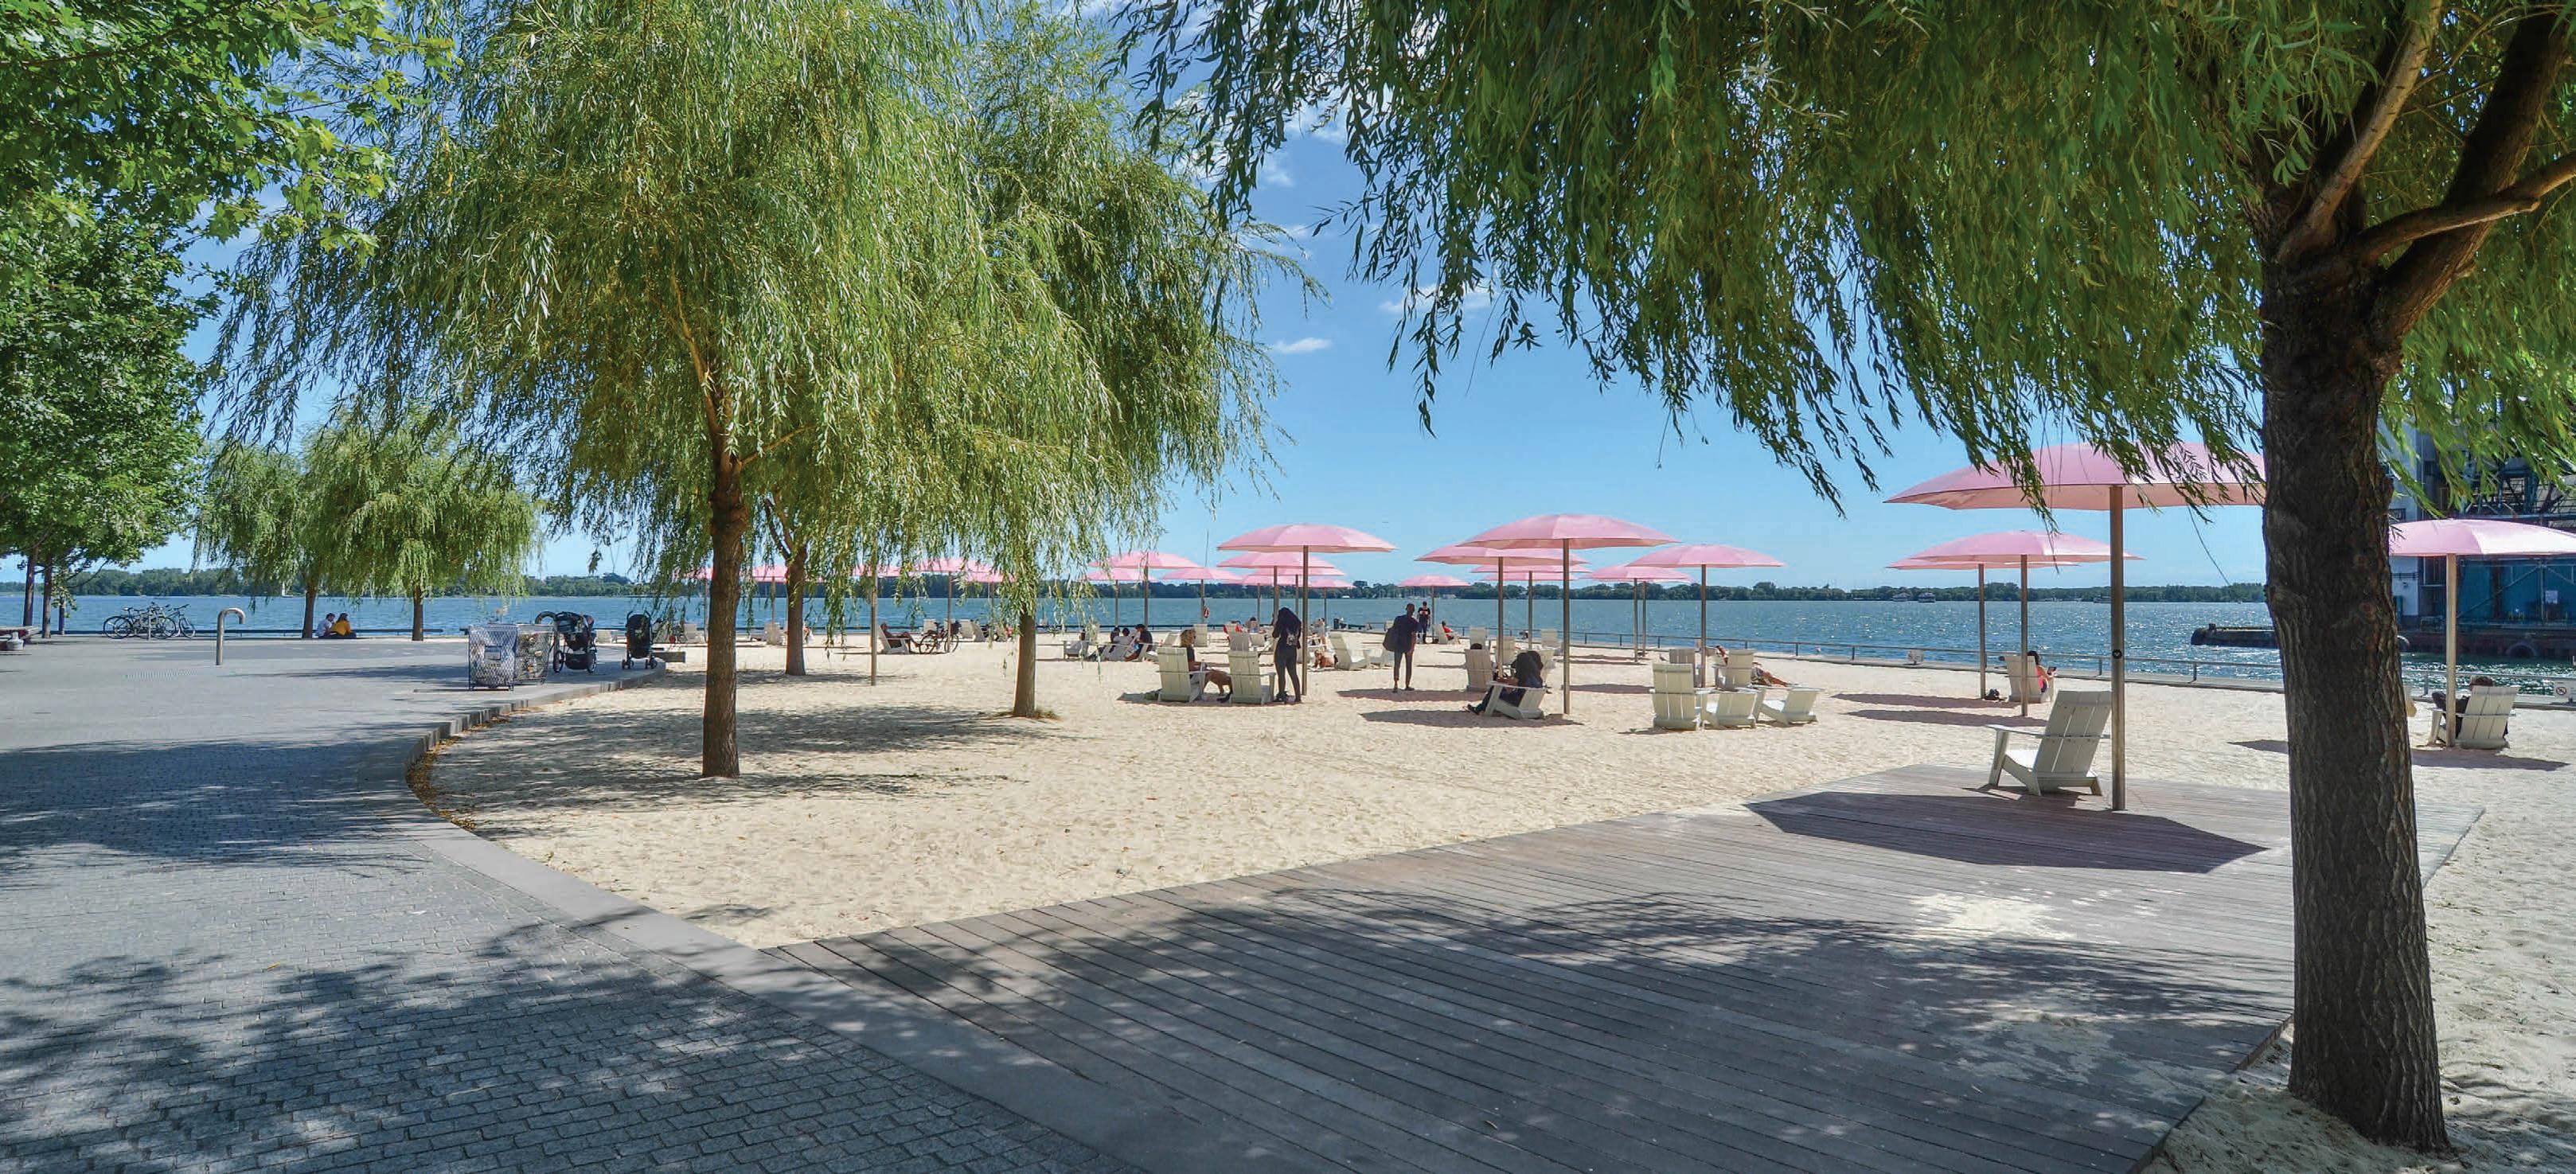 an urban beach with pink umbrellas and willow trees